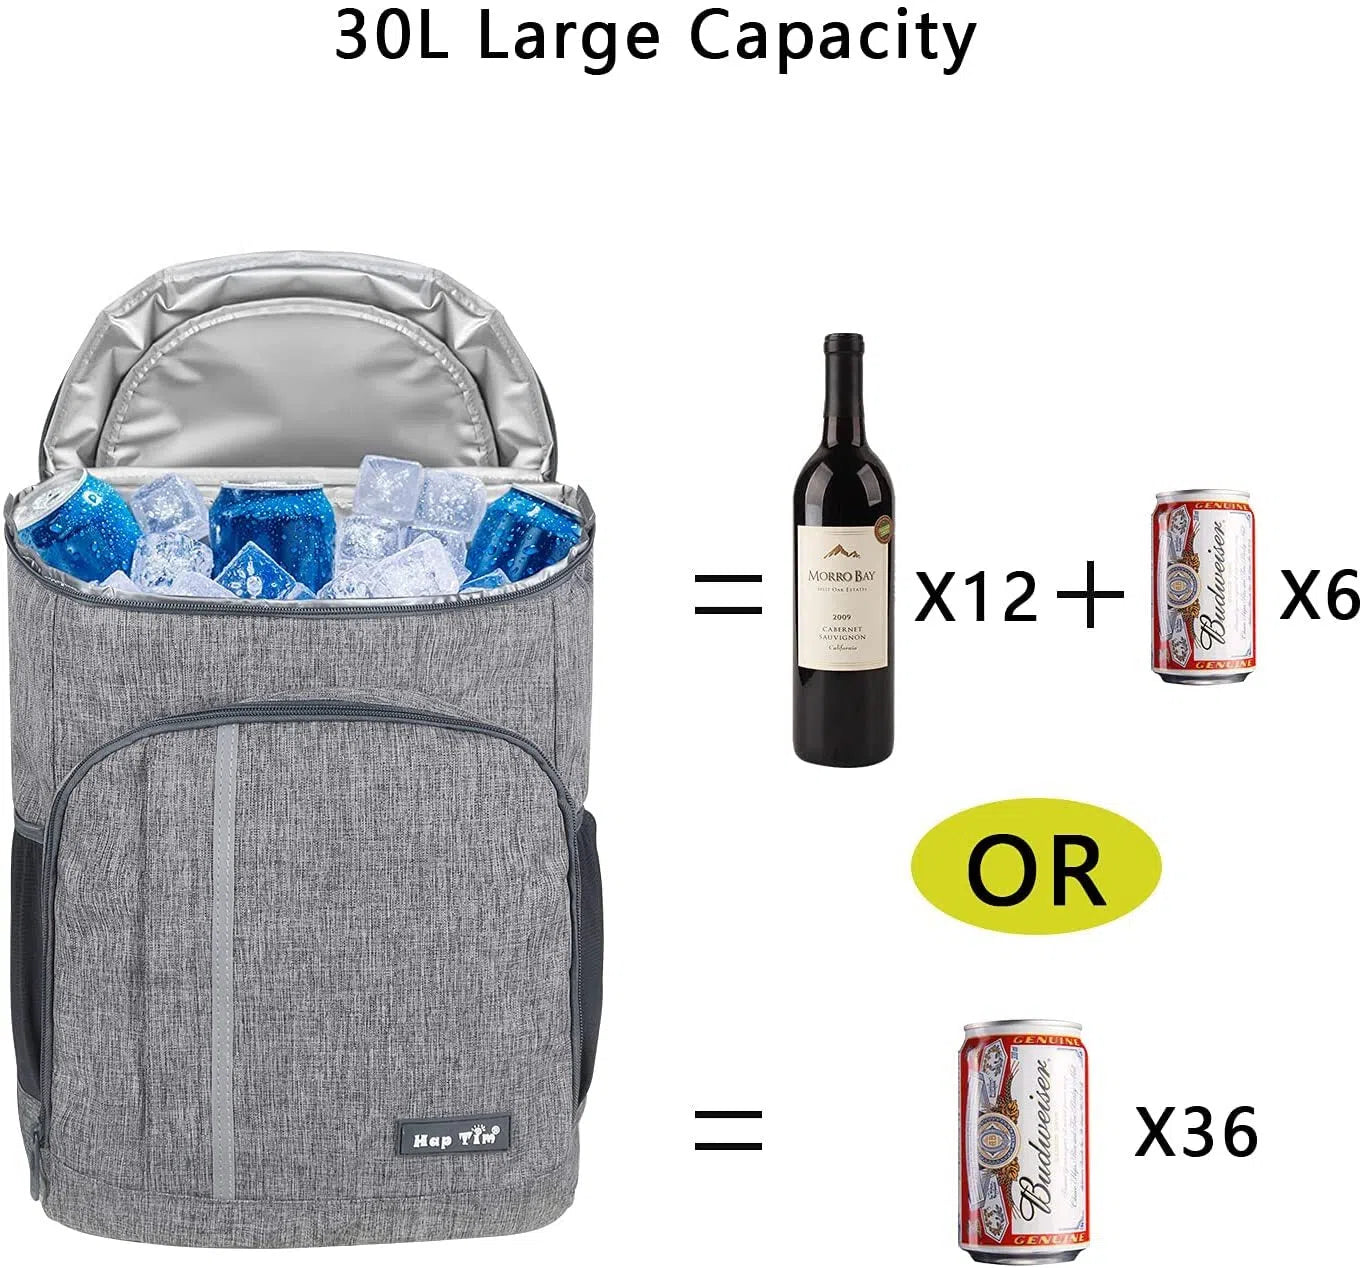 Hap Tim Backpack Cooler Insulated Waterproof Picnic Backpack 30 Can Soft Sided Grey for Beach, Camping, Hiking, Lunch (1002-G)